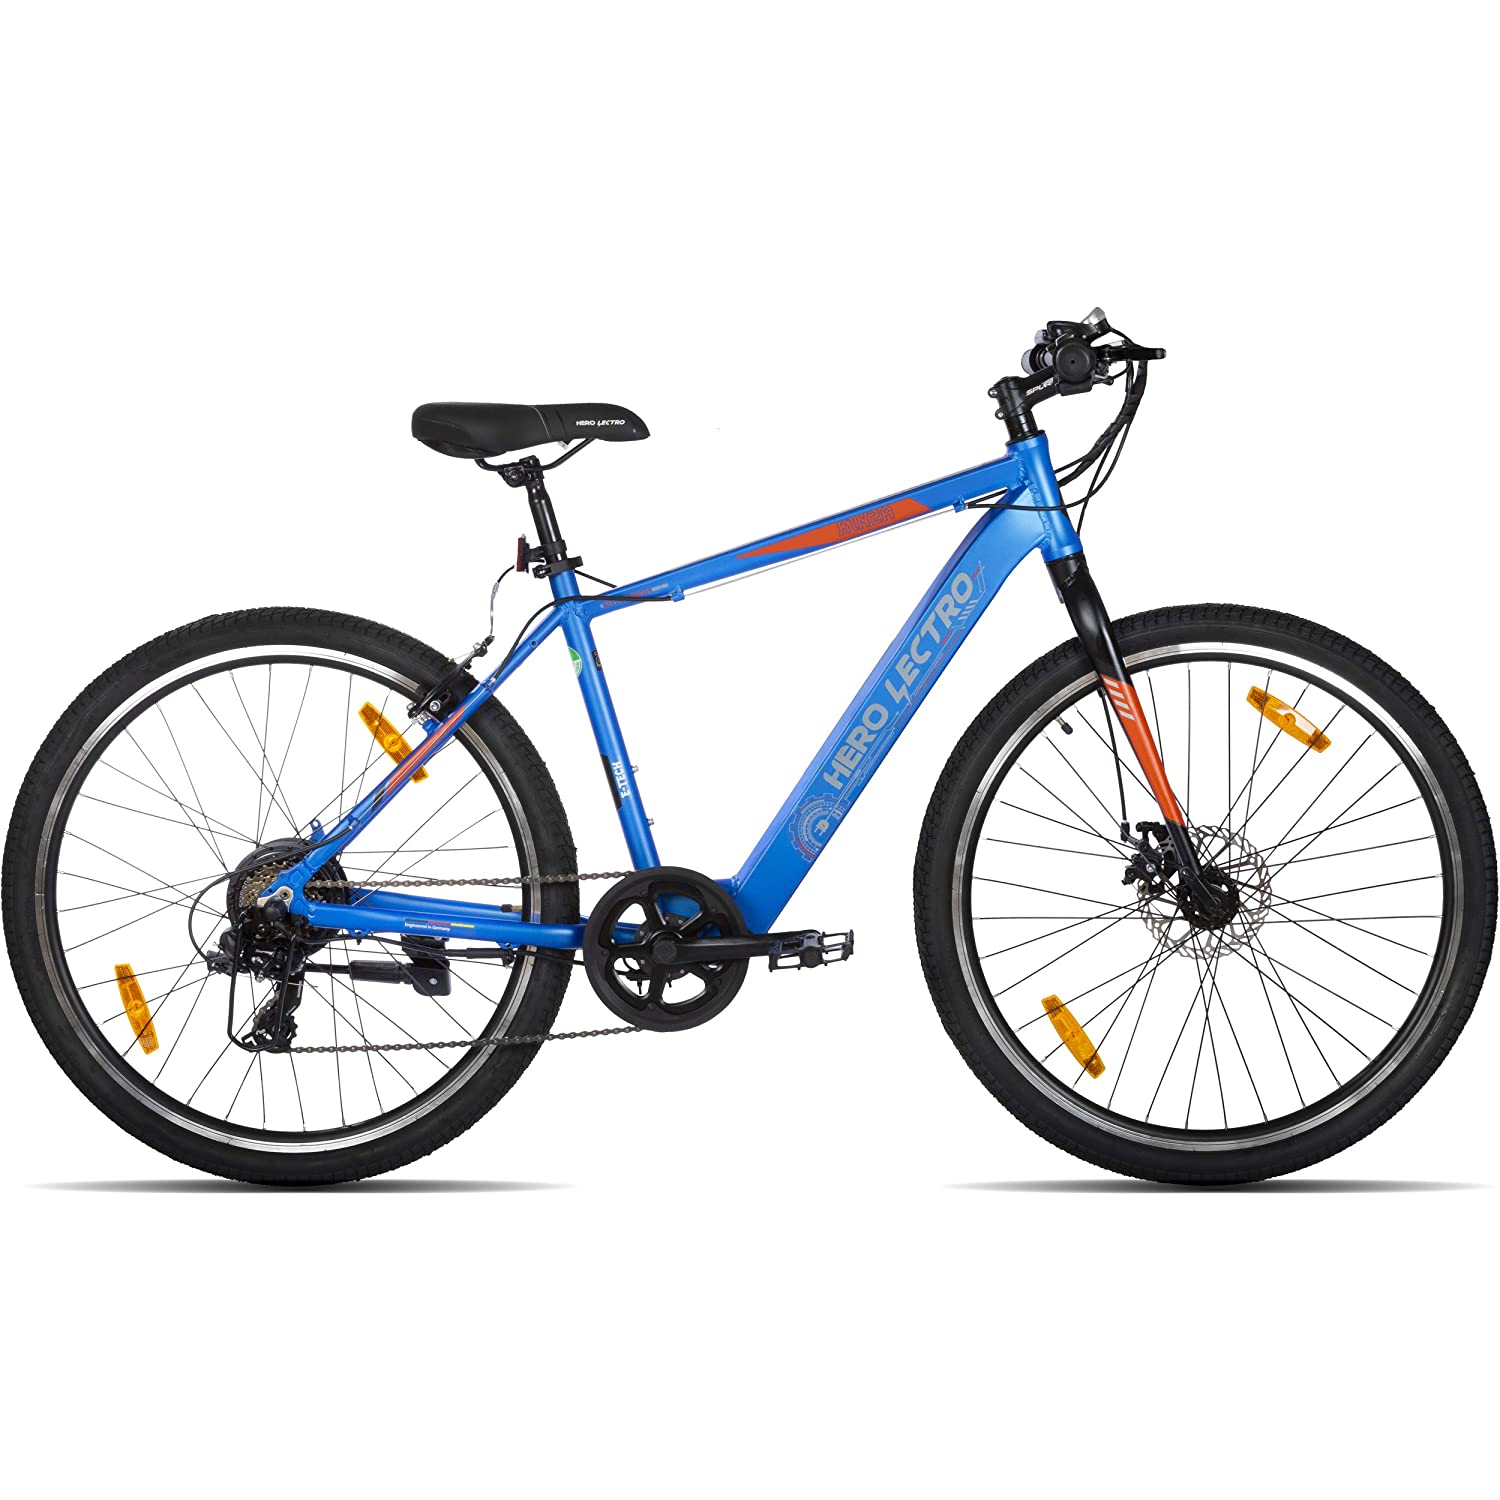 {NEW} Top 10 Best Electric Bicycle In India Under 20000